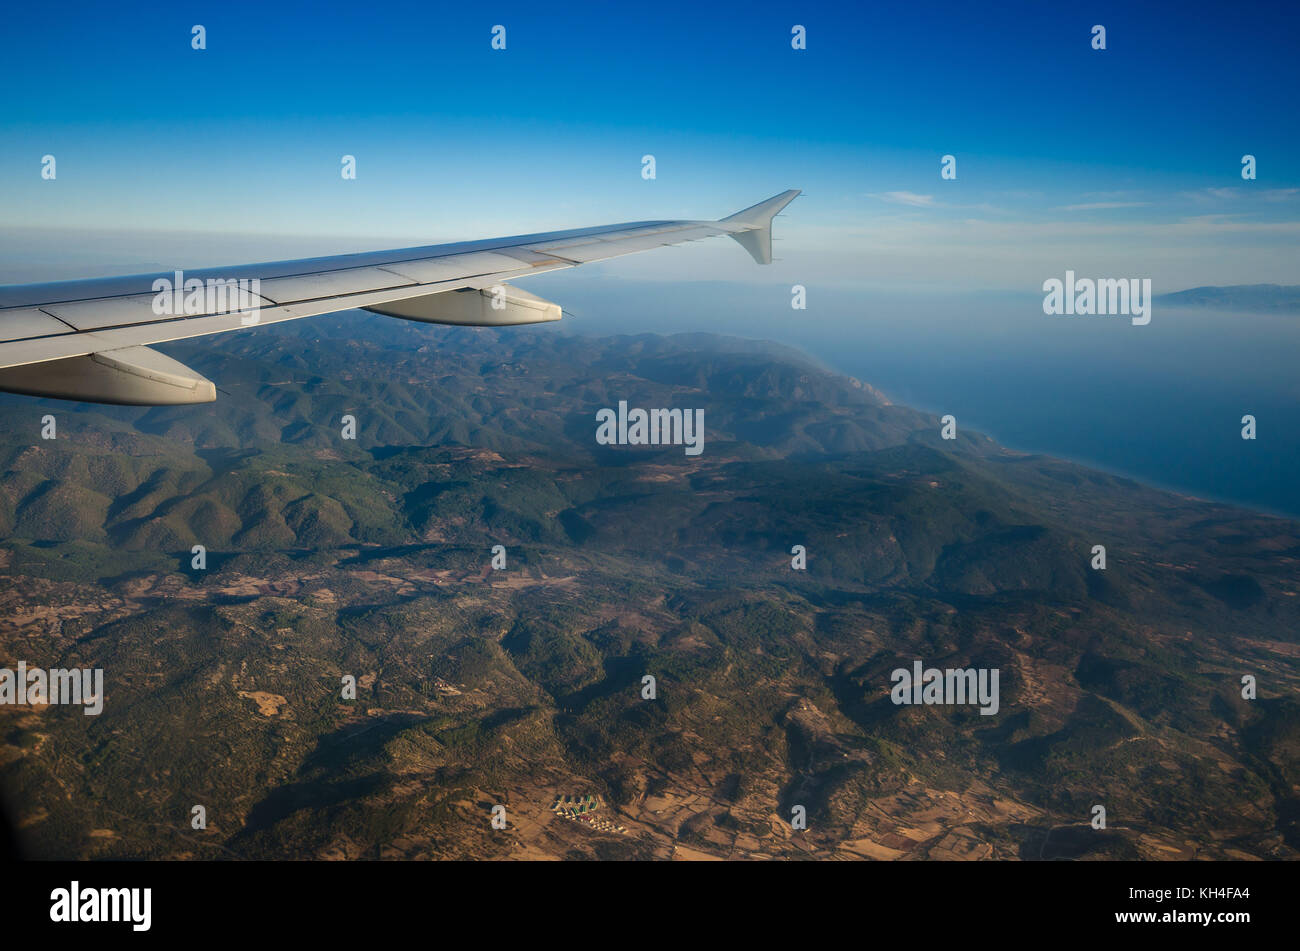 Amazing view from the plane window at the sky.Flight over the aegean sea. Stock Photo